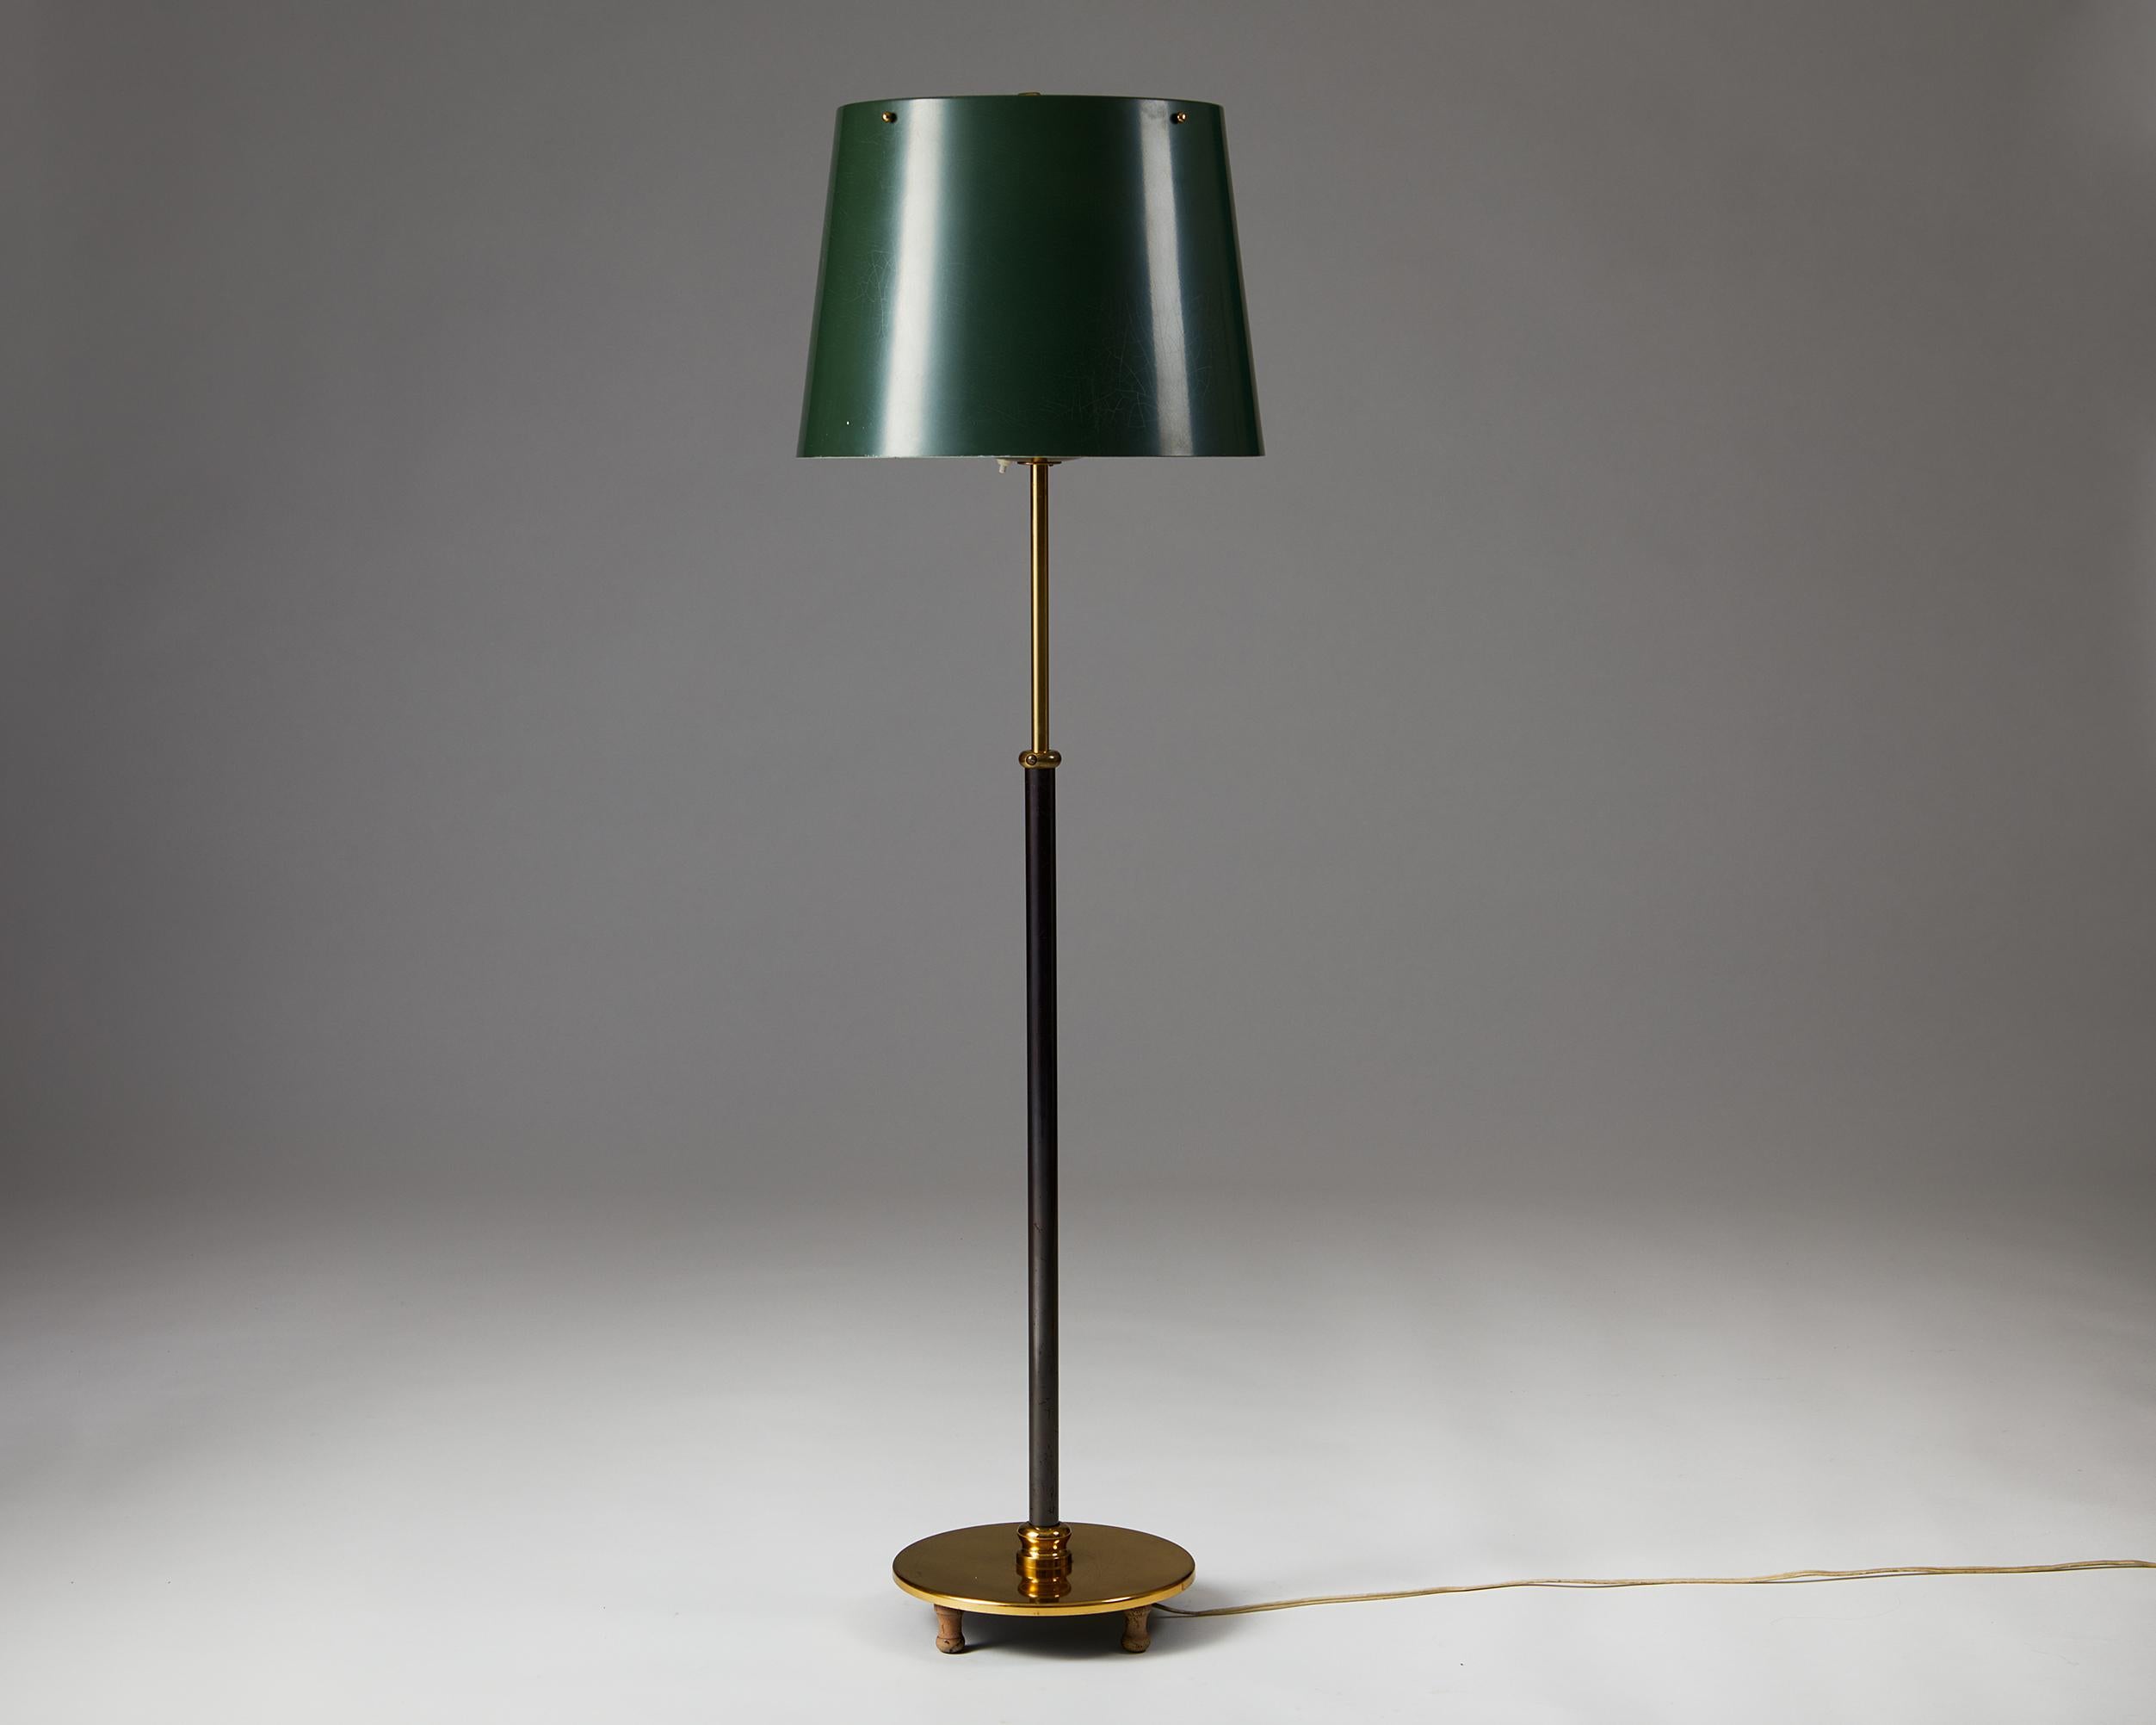 Black lacquered brass with metal shade.

The height is adjustable.

Measure: H: 141 cm / 4' 7 1/2